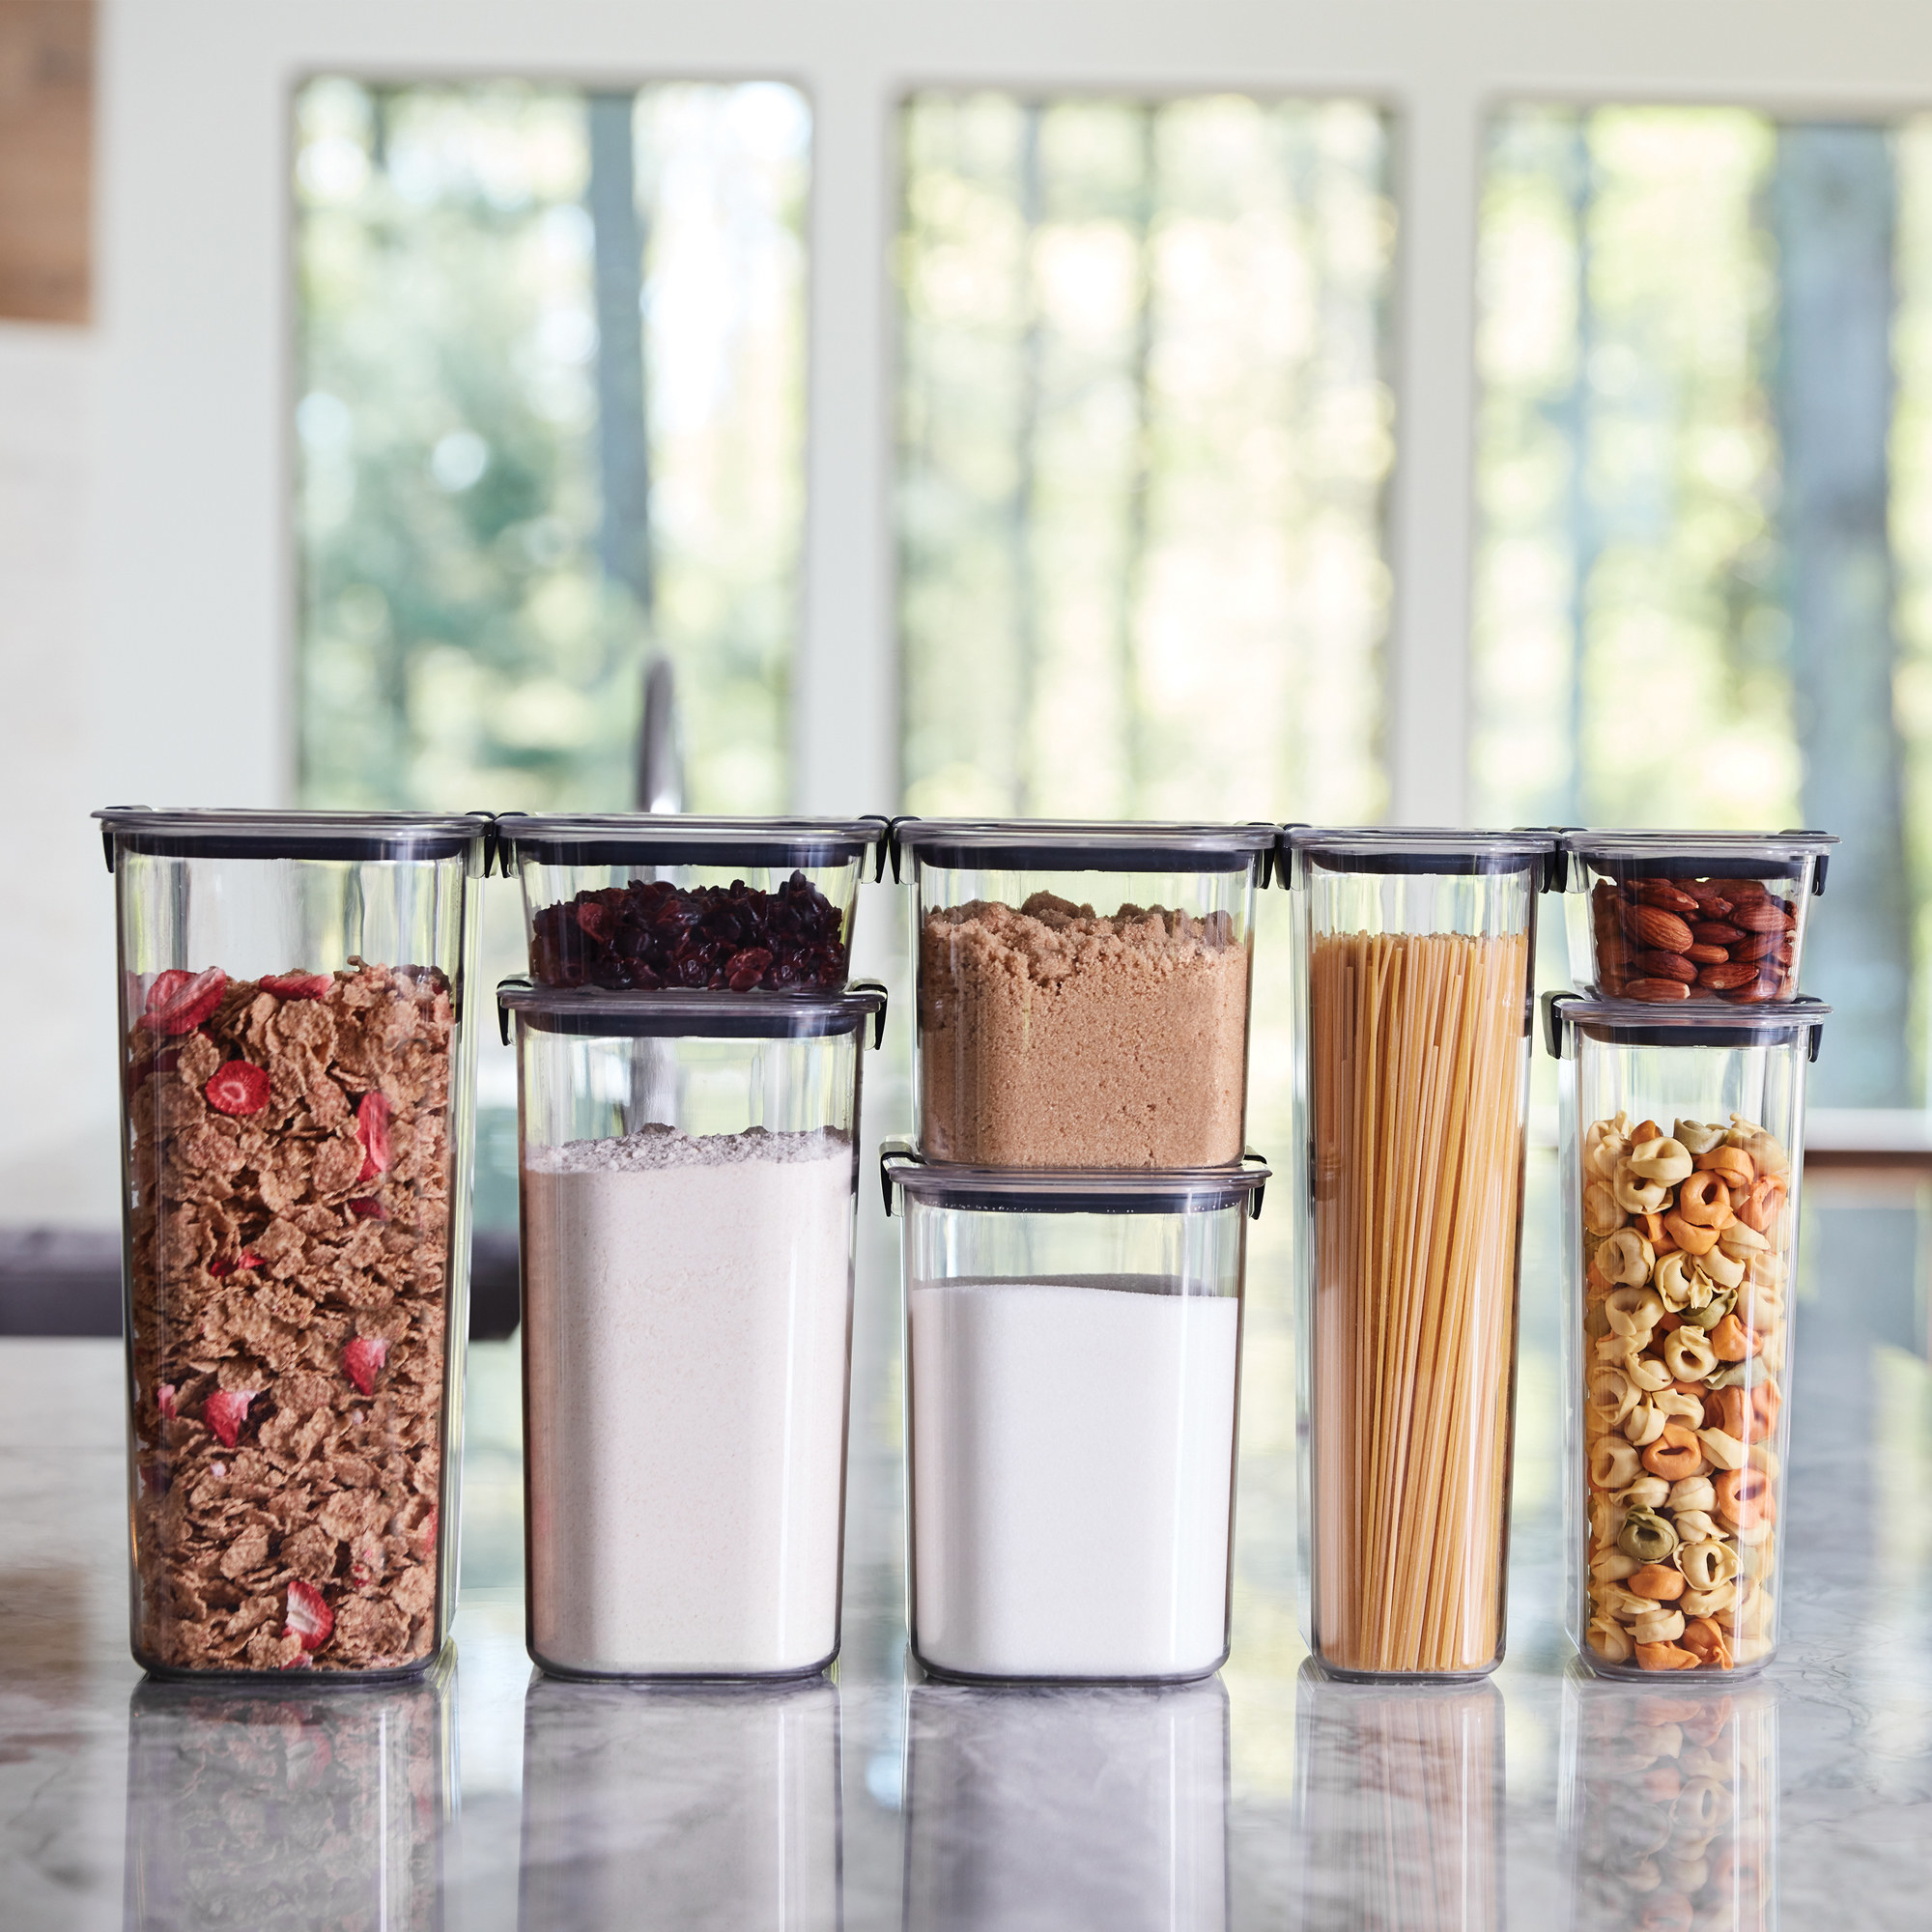 clear food storage containers filled with cereal, pasta, flour, and more, on a table